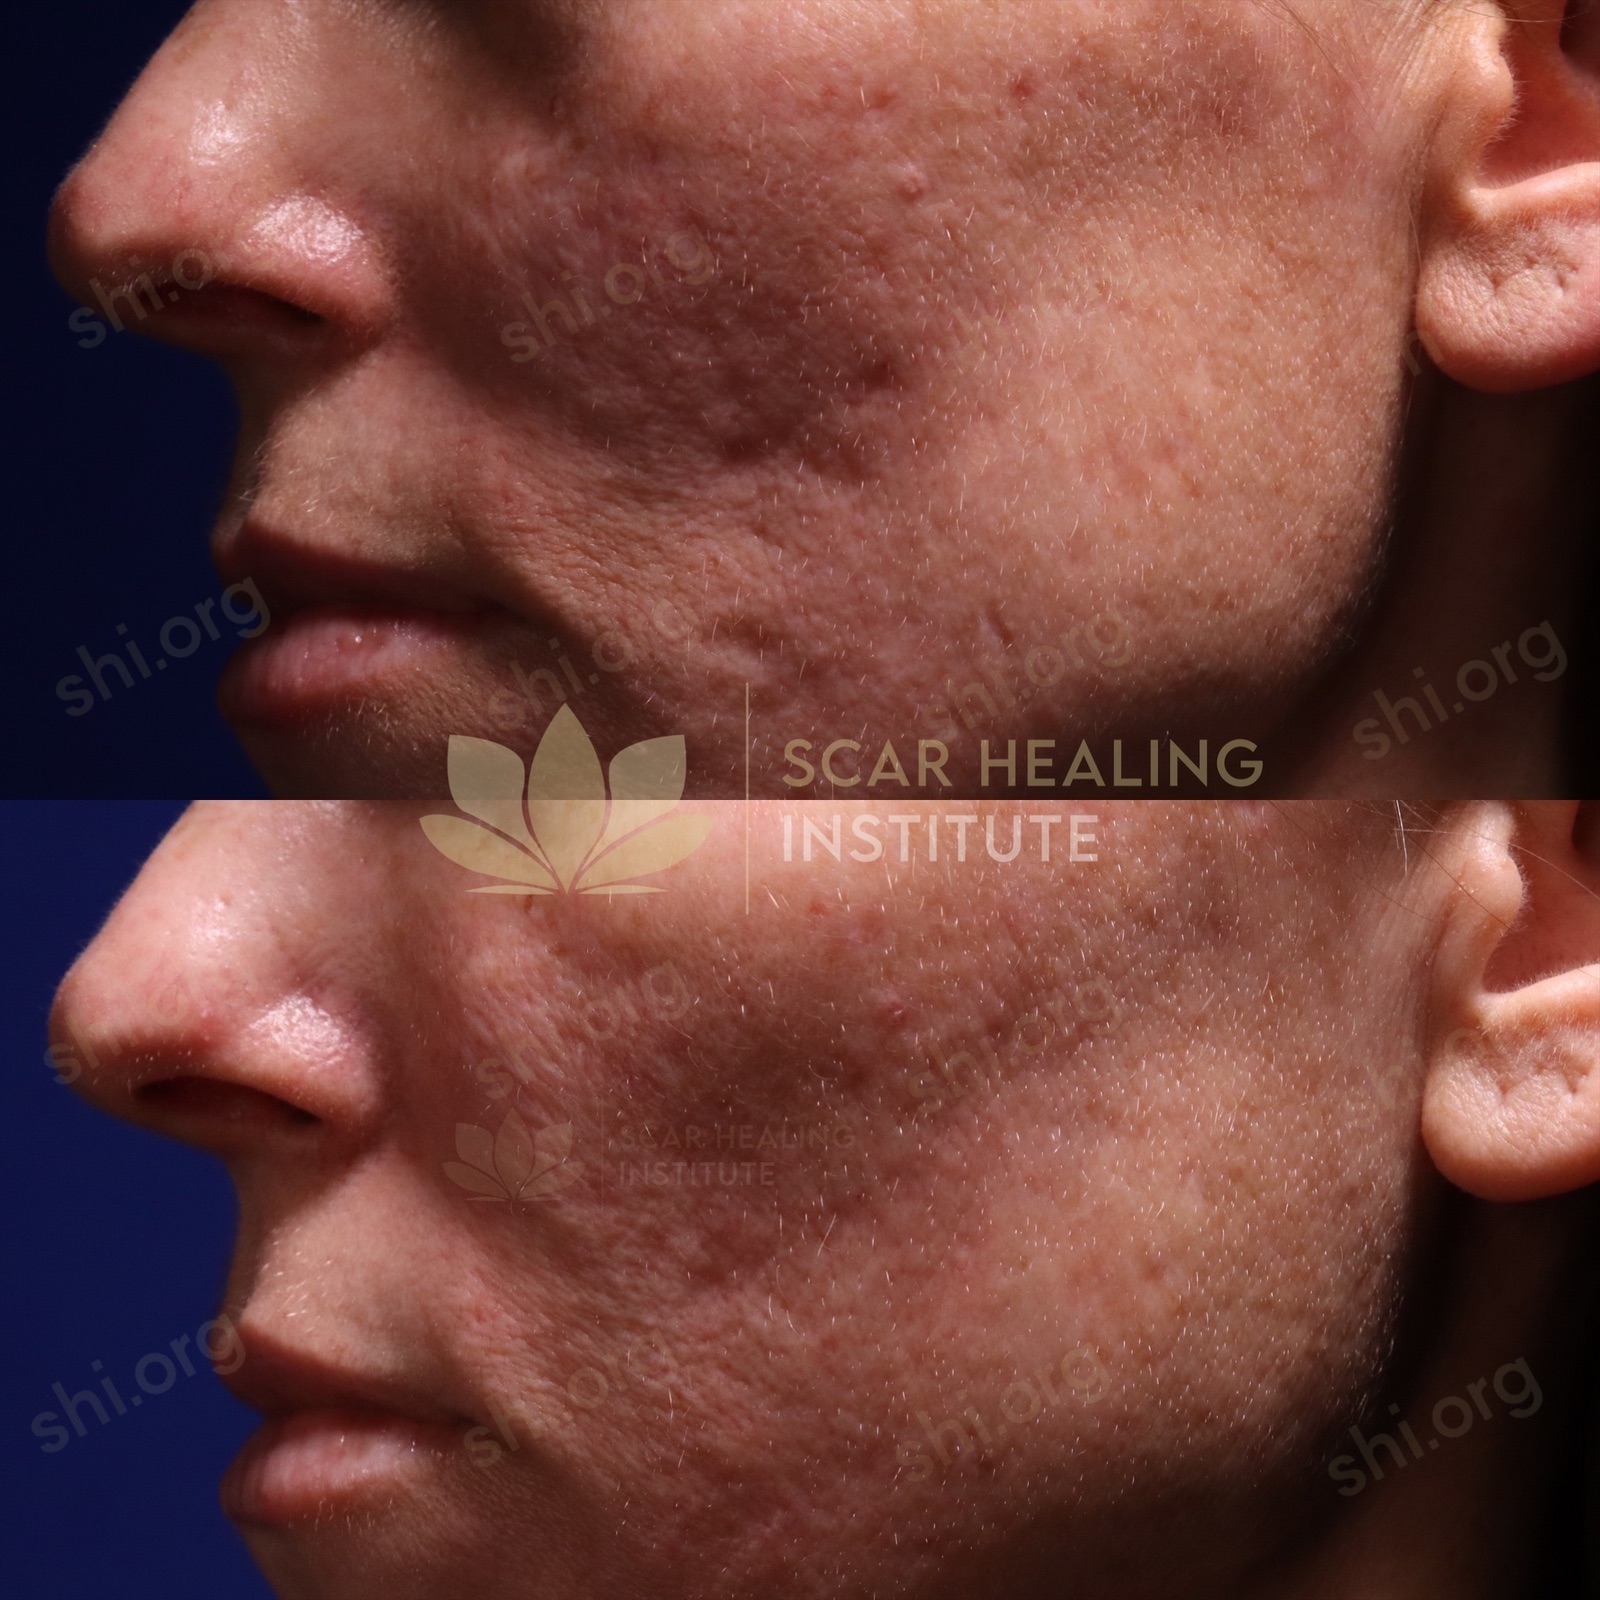 LM SHI 31 - Acne Scarring Active Acne Patient Results Scar Healing